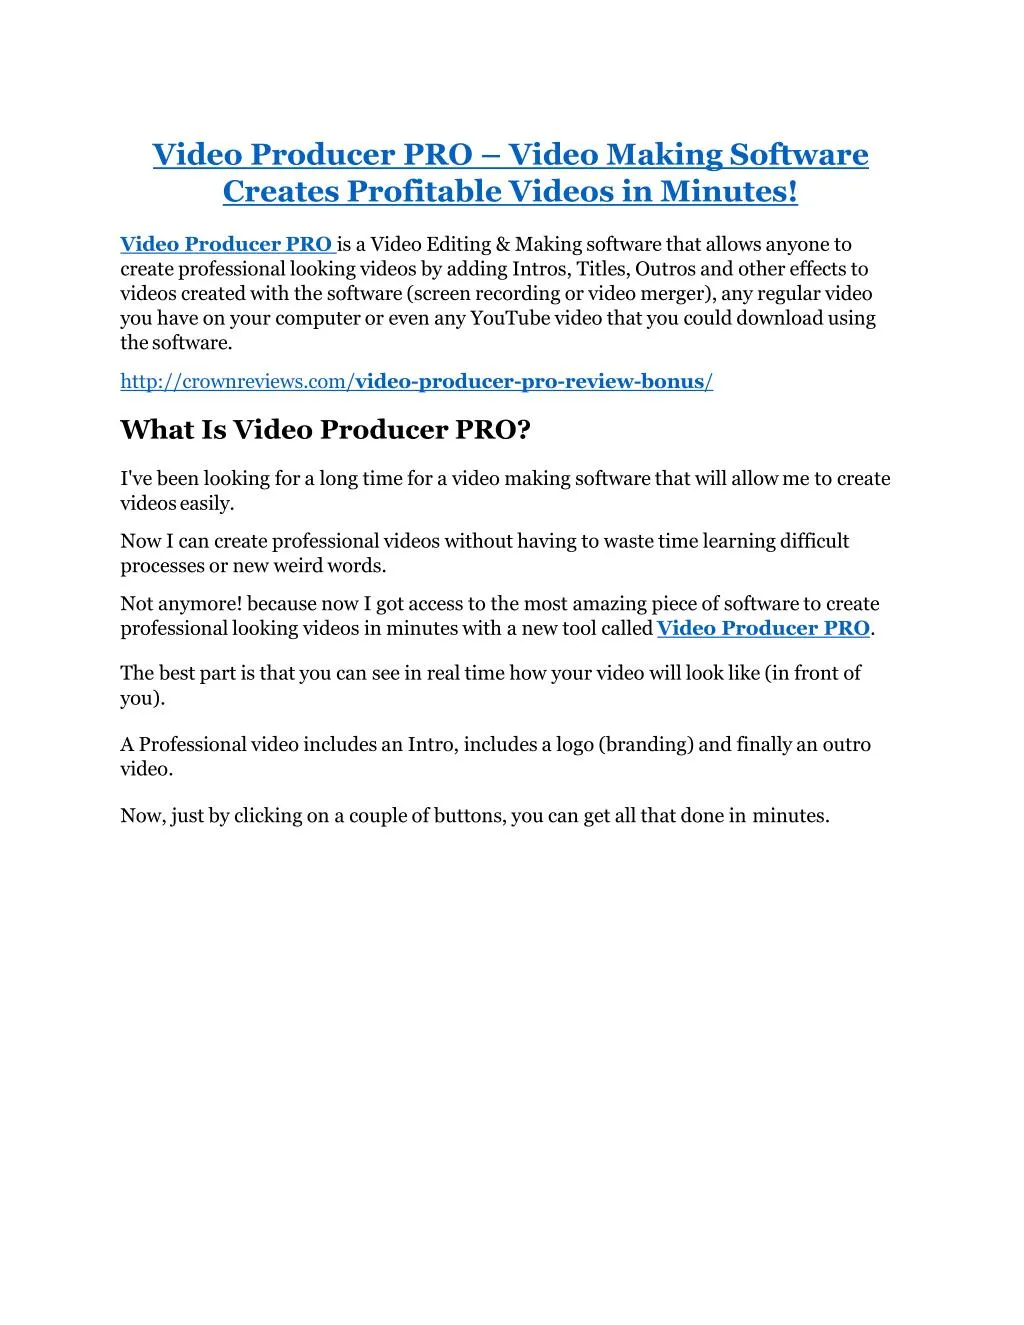 video producer pro video making software creates